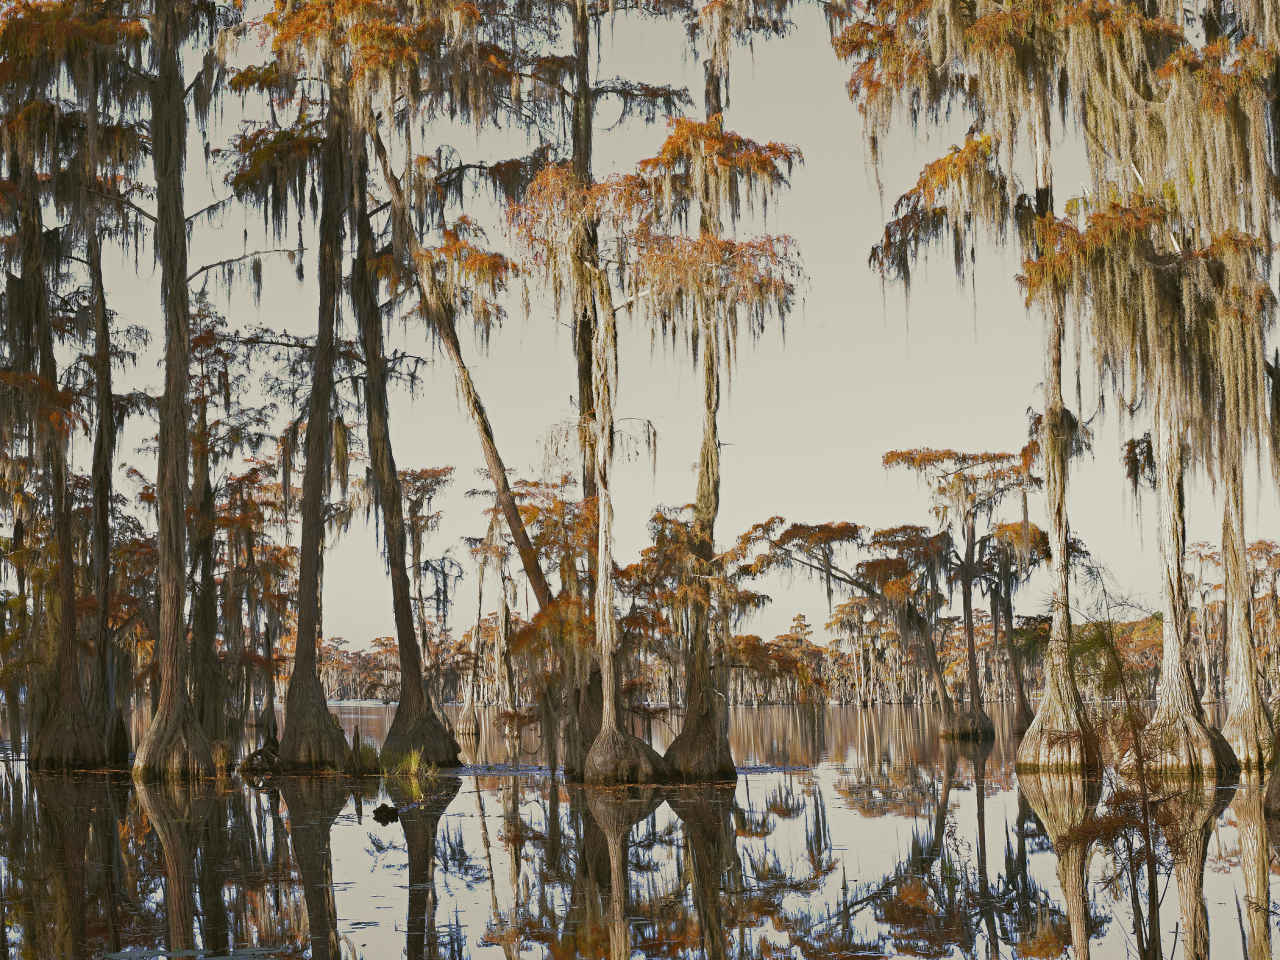 Pierre Gonnord, Swamp IV - The South Edition